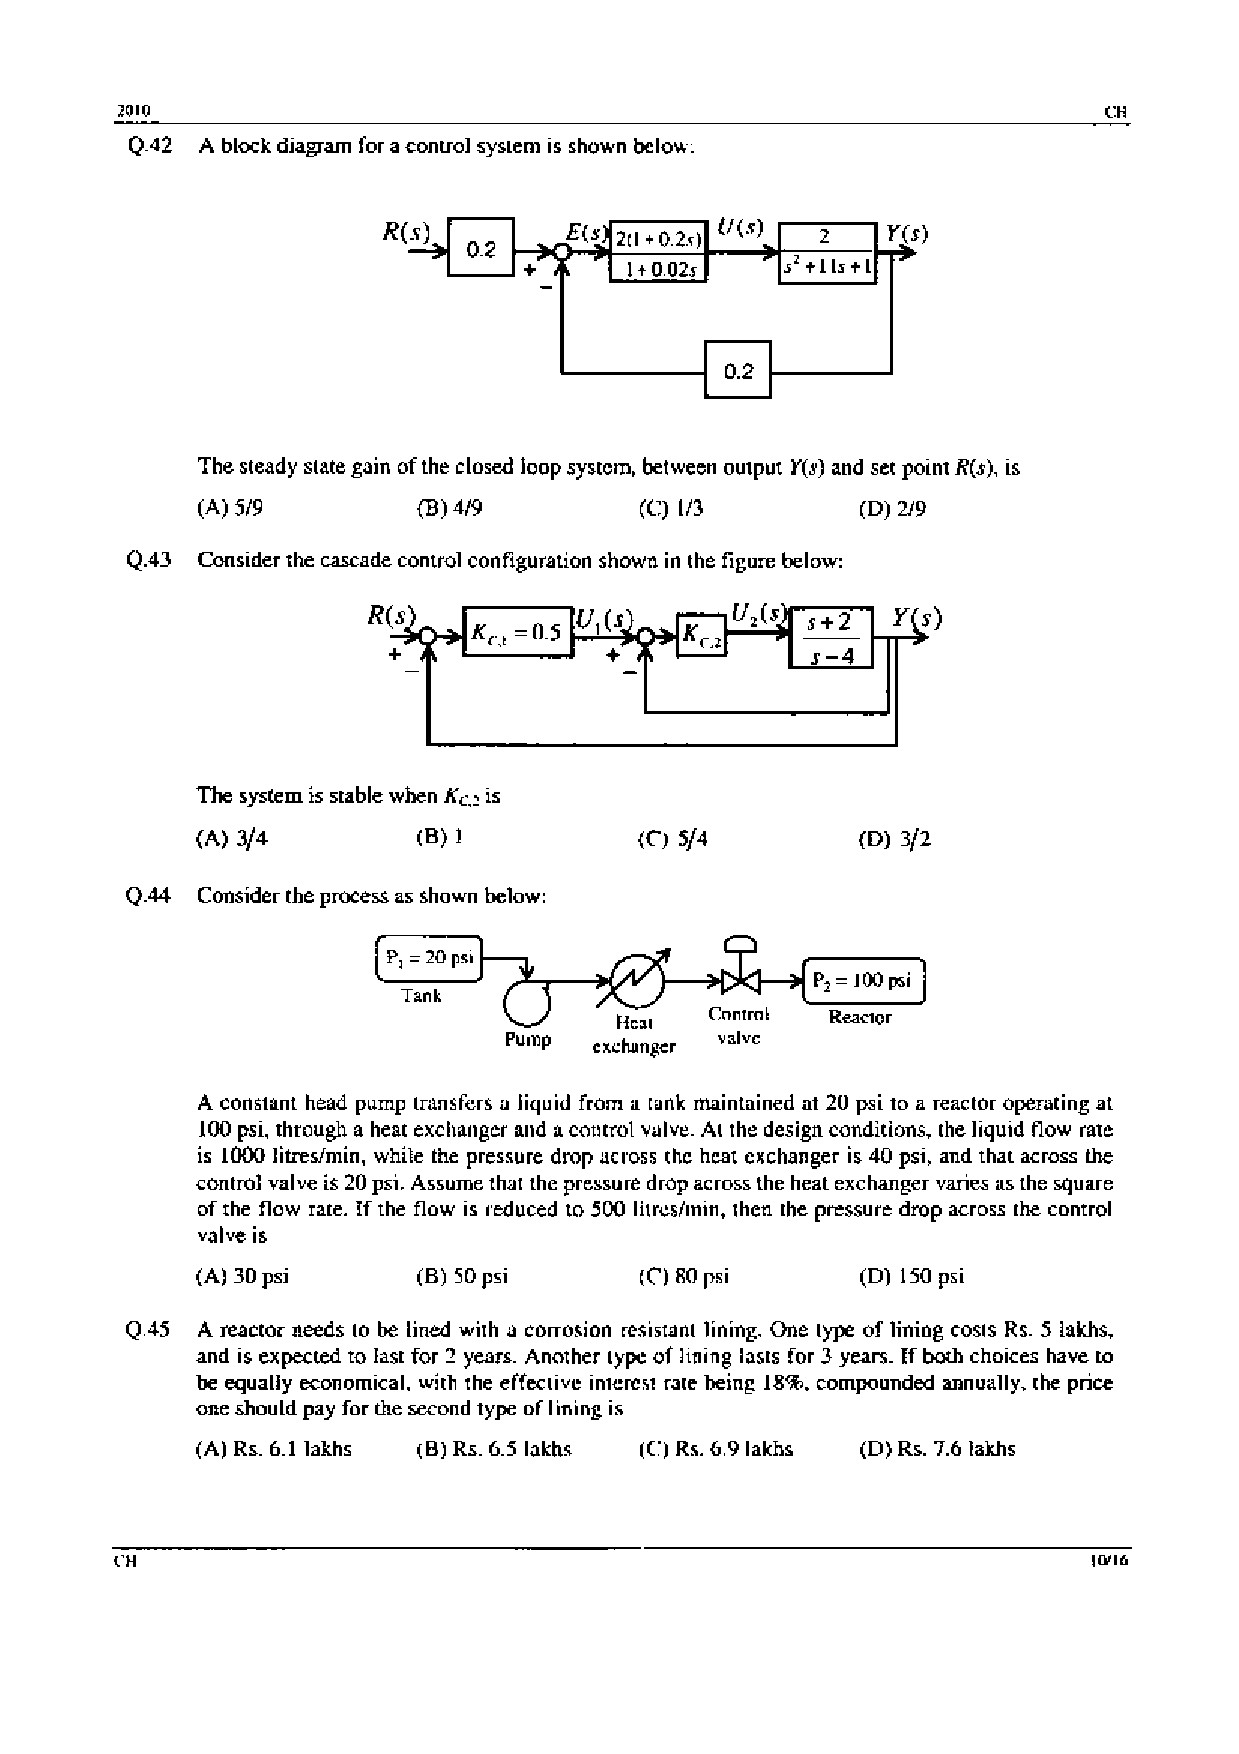 GATE Exam Question Paper 2010 Chemical Engineering 10